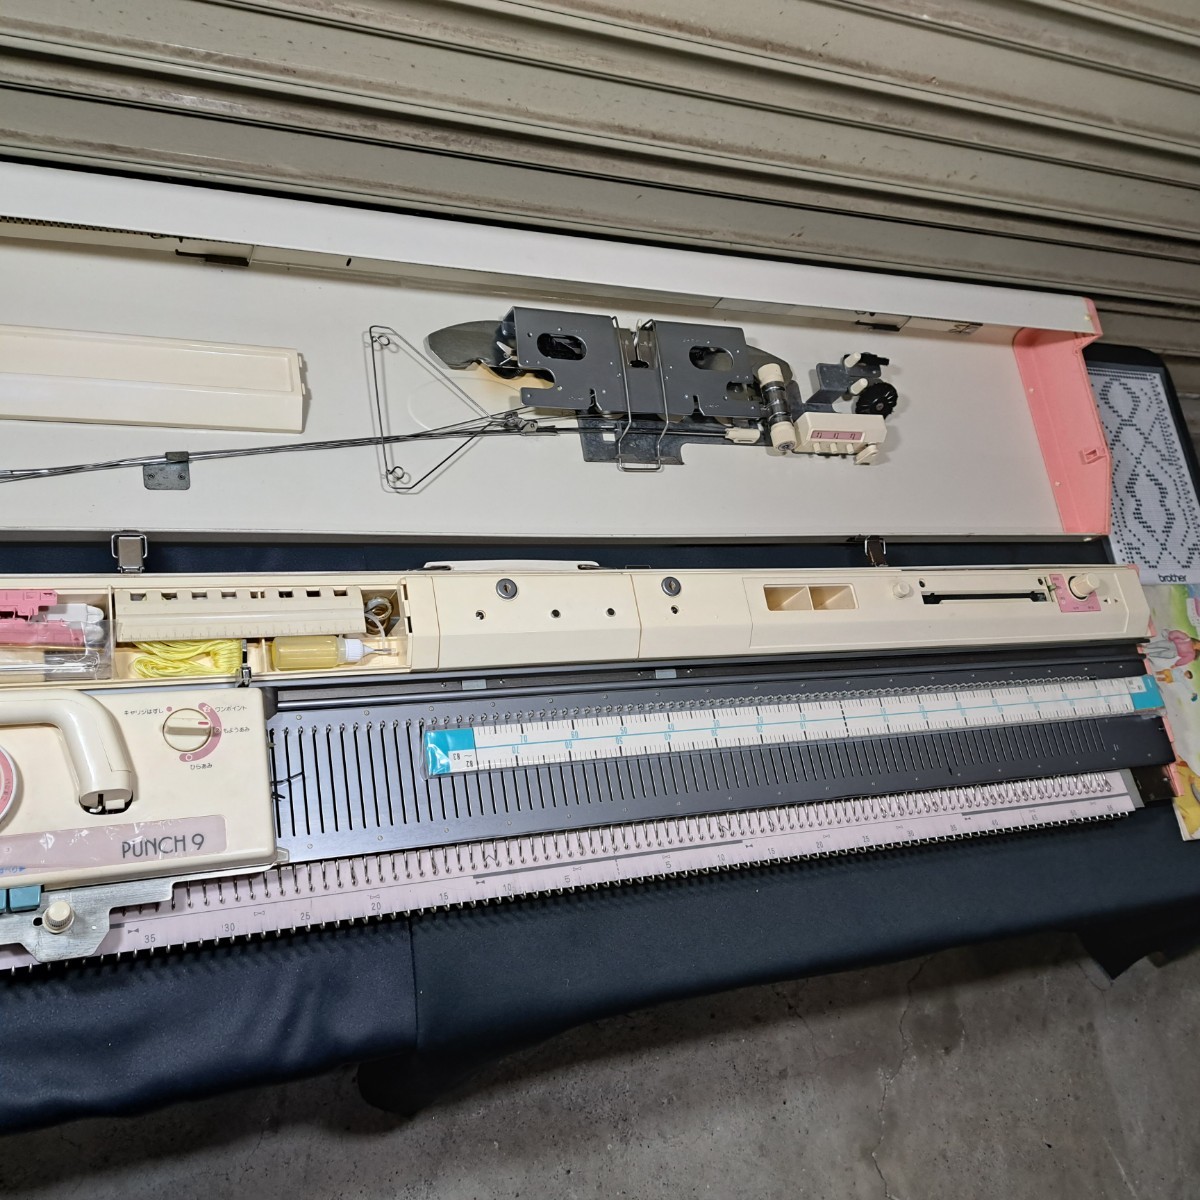  knitter, compilation machine, Brother knitter, Brother compilation machine 9.( futoshi machine ) punch na in (9)KH-260! service completed, selection needle excellent, accessory relation lack of less!